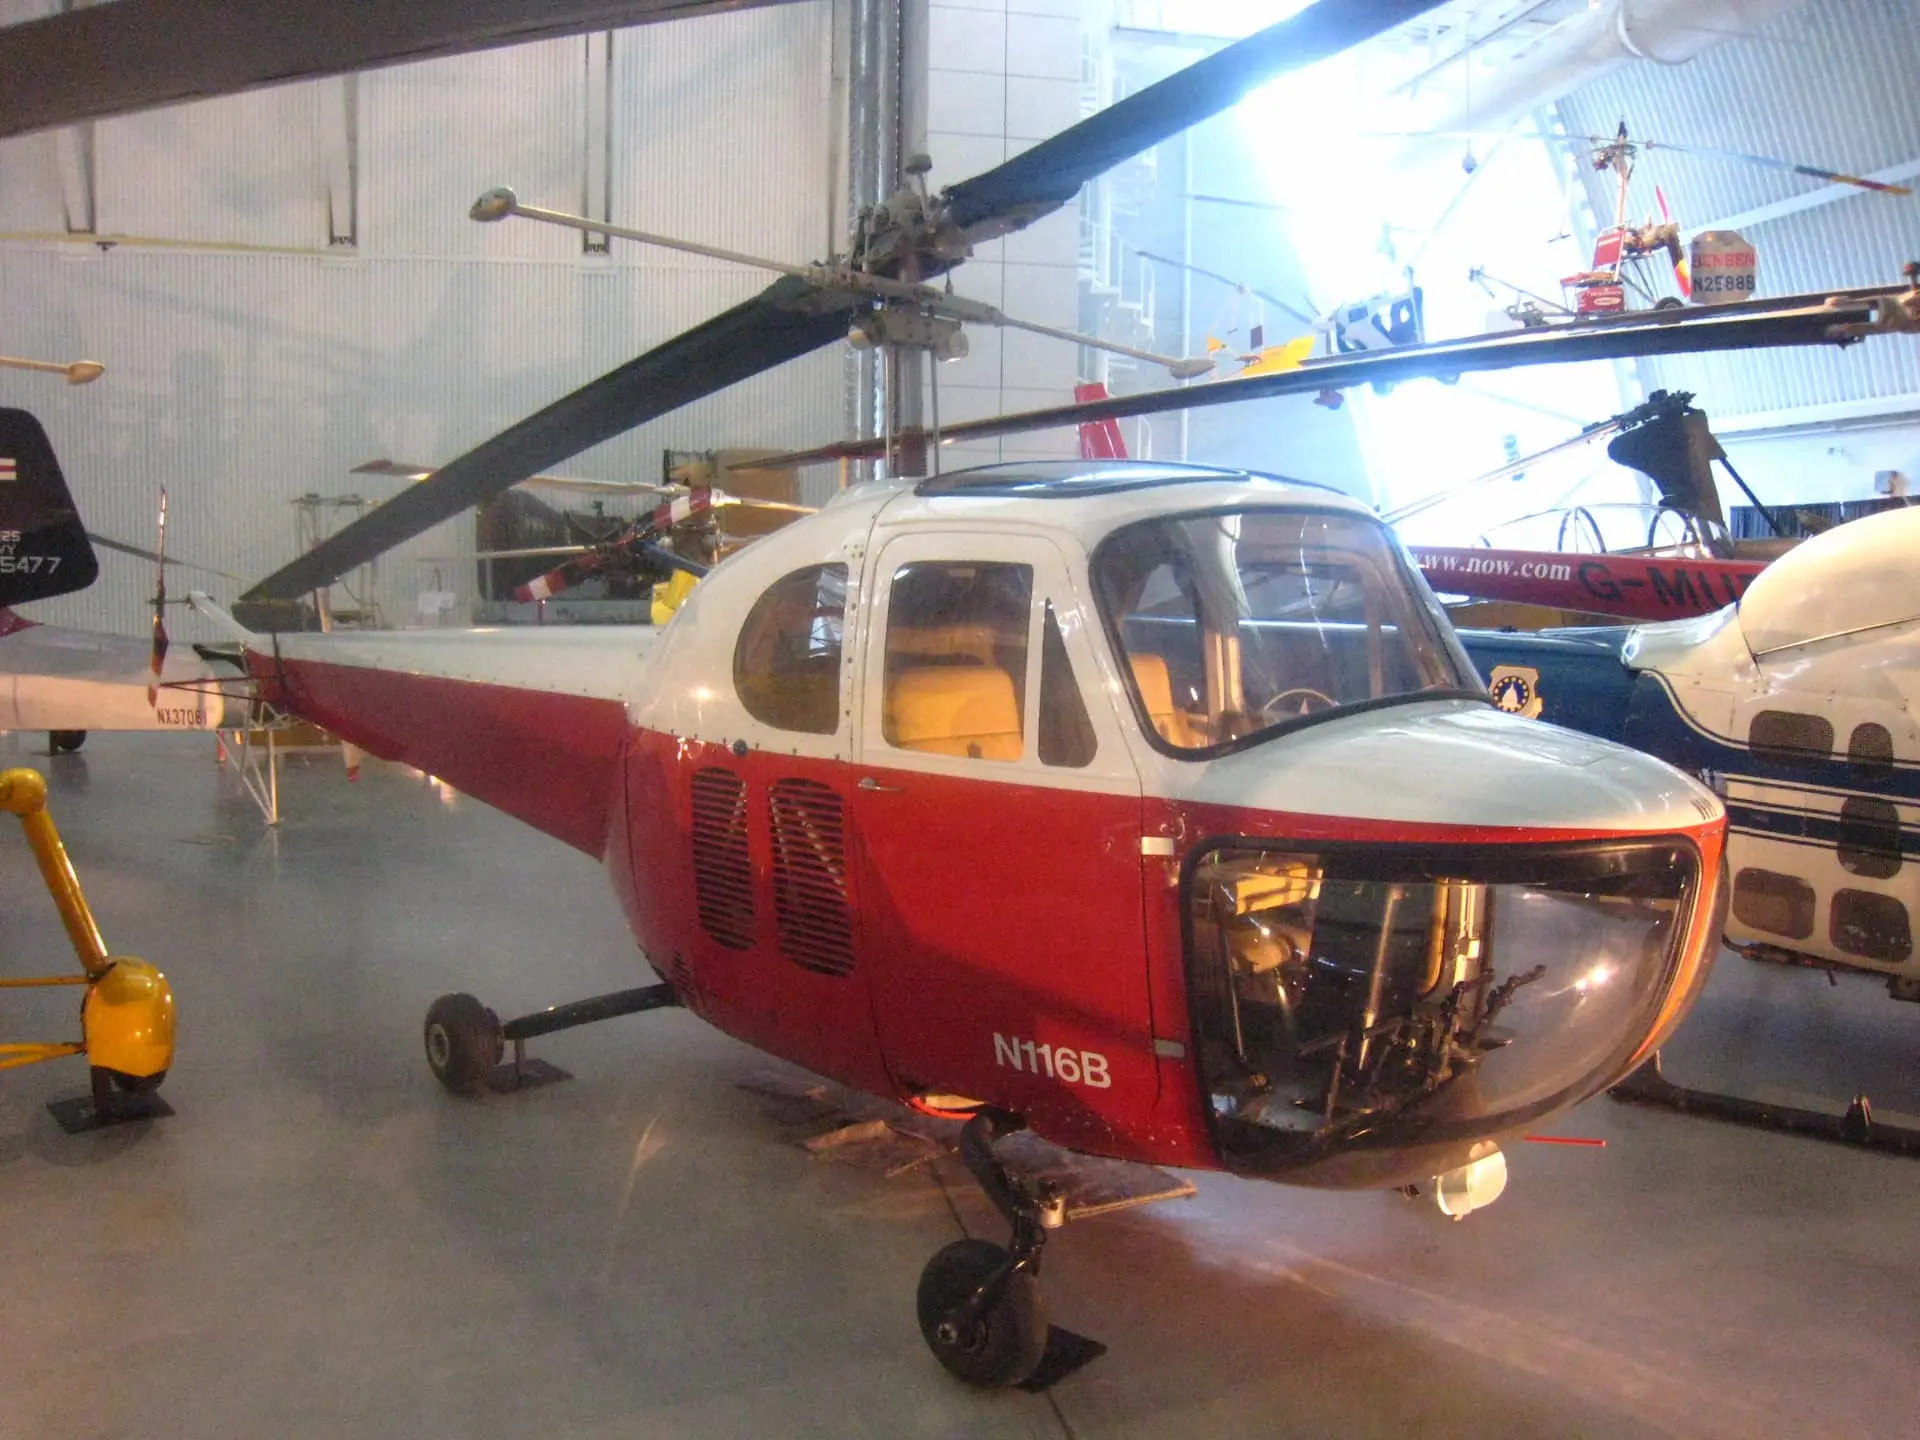 This Bell 47B is similar to the one Carl Brady used when he revolutionized the aviation field in America's Last Frontier.